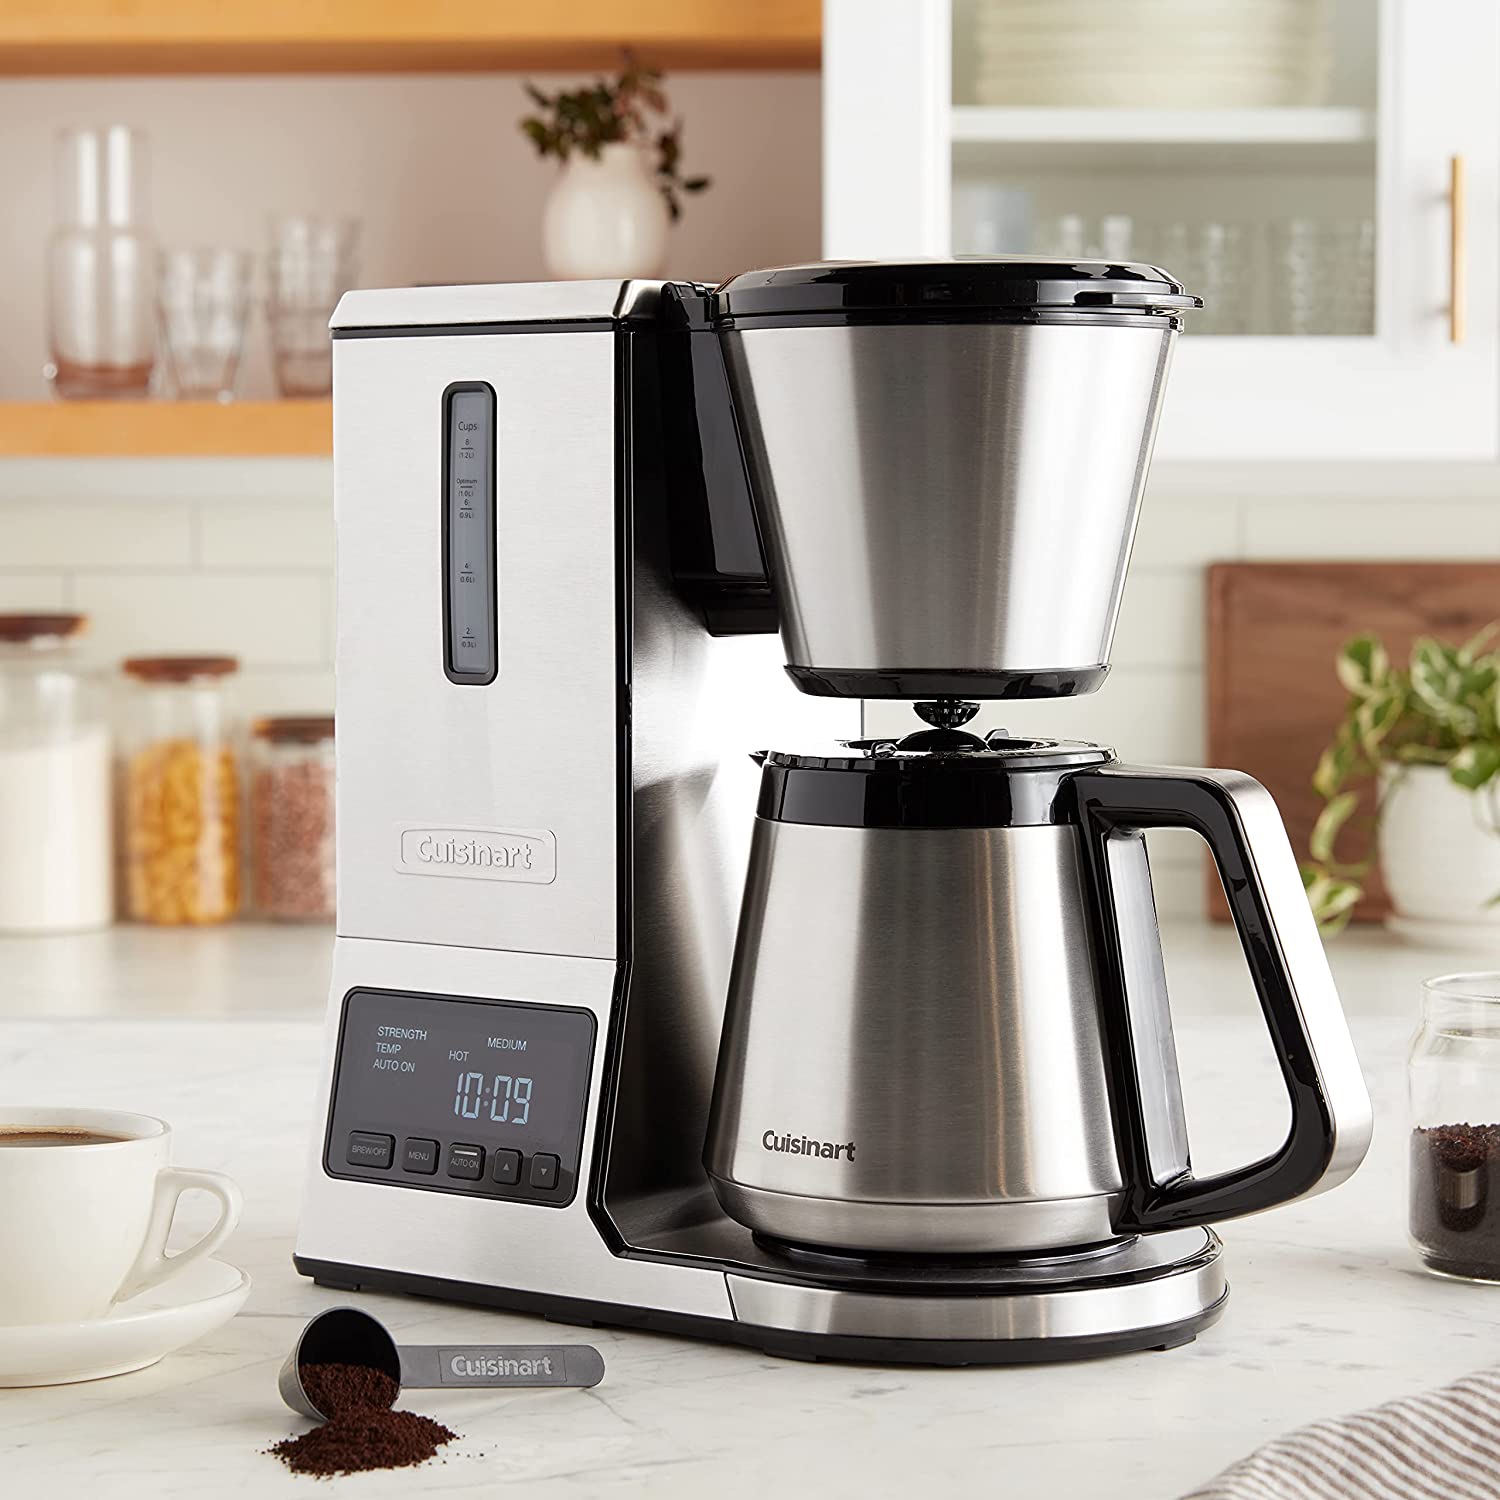 The 5 best coffee makers